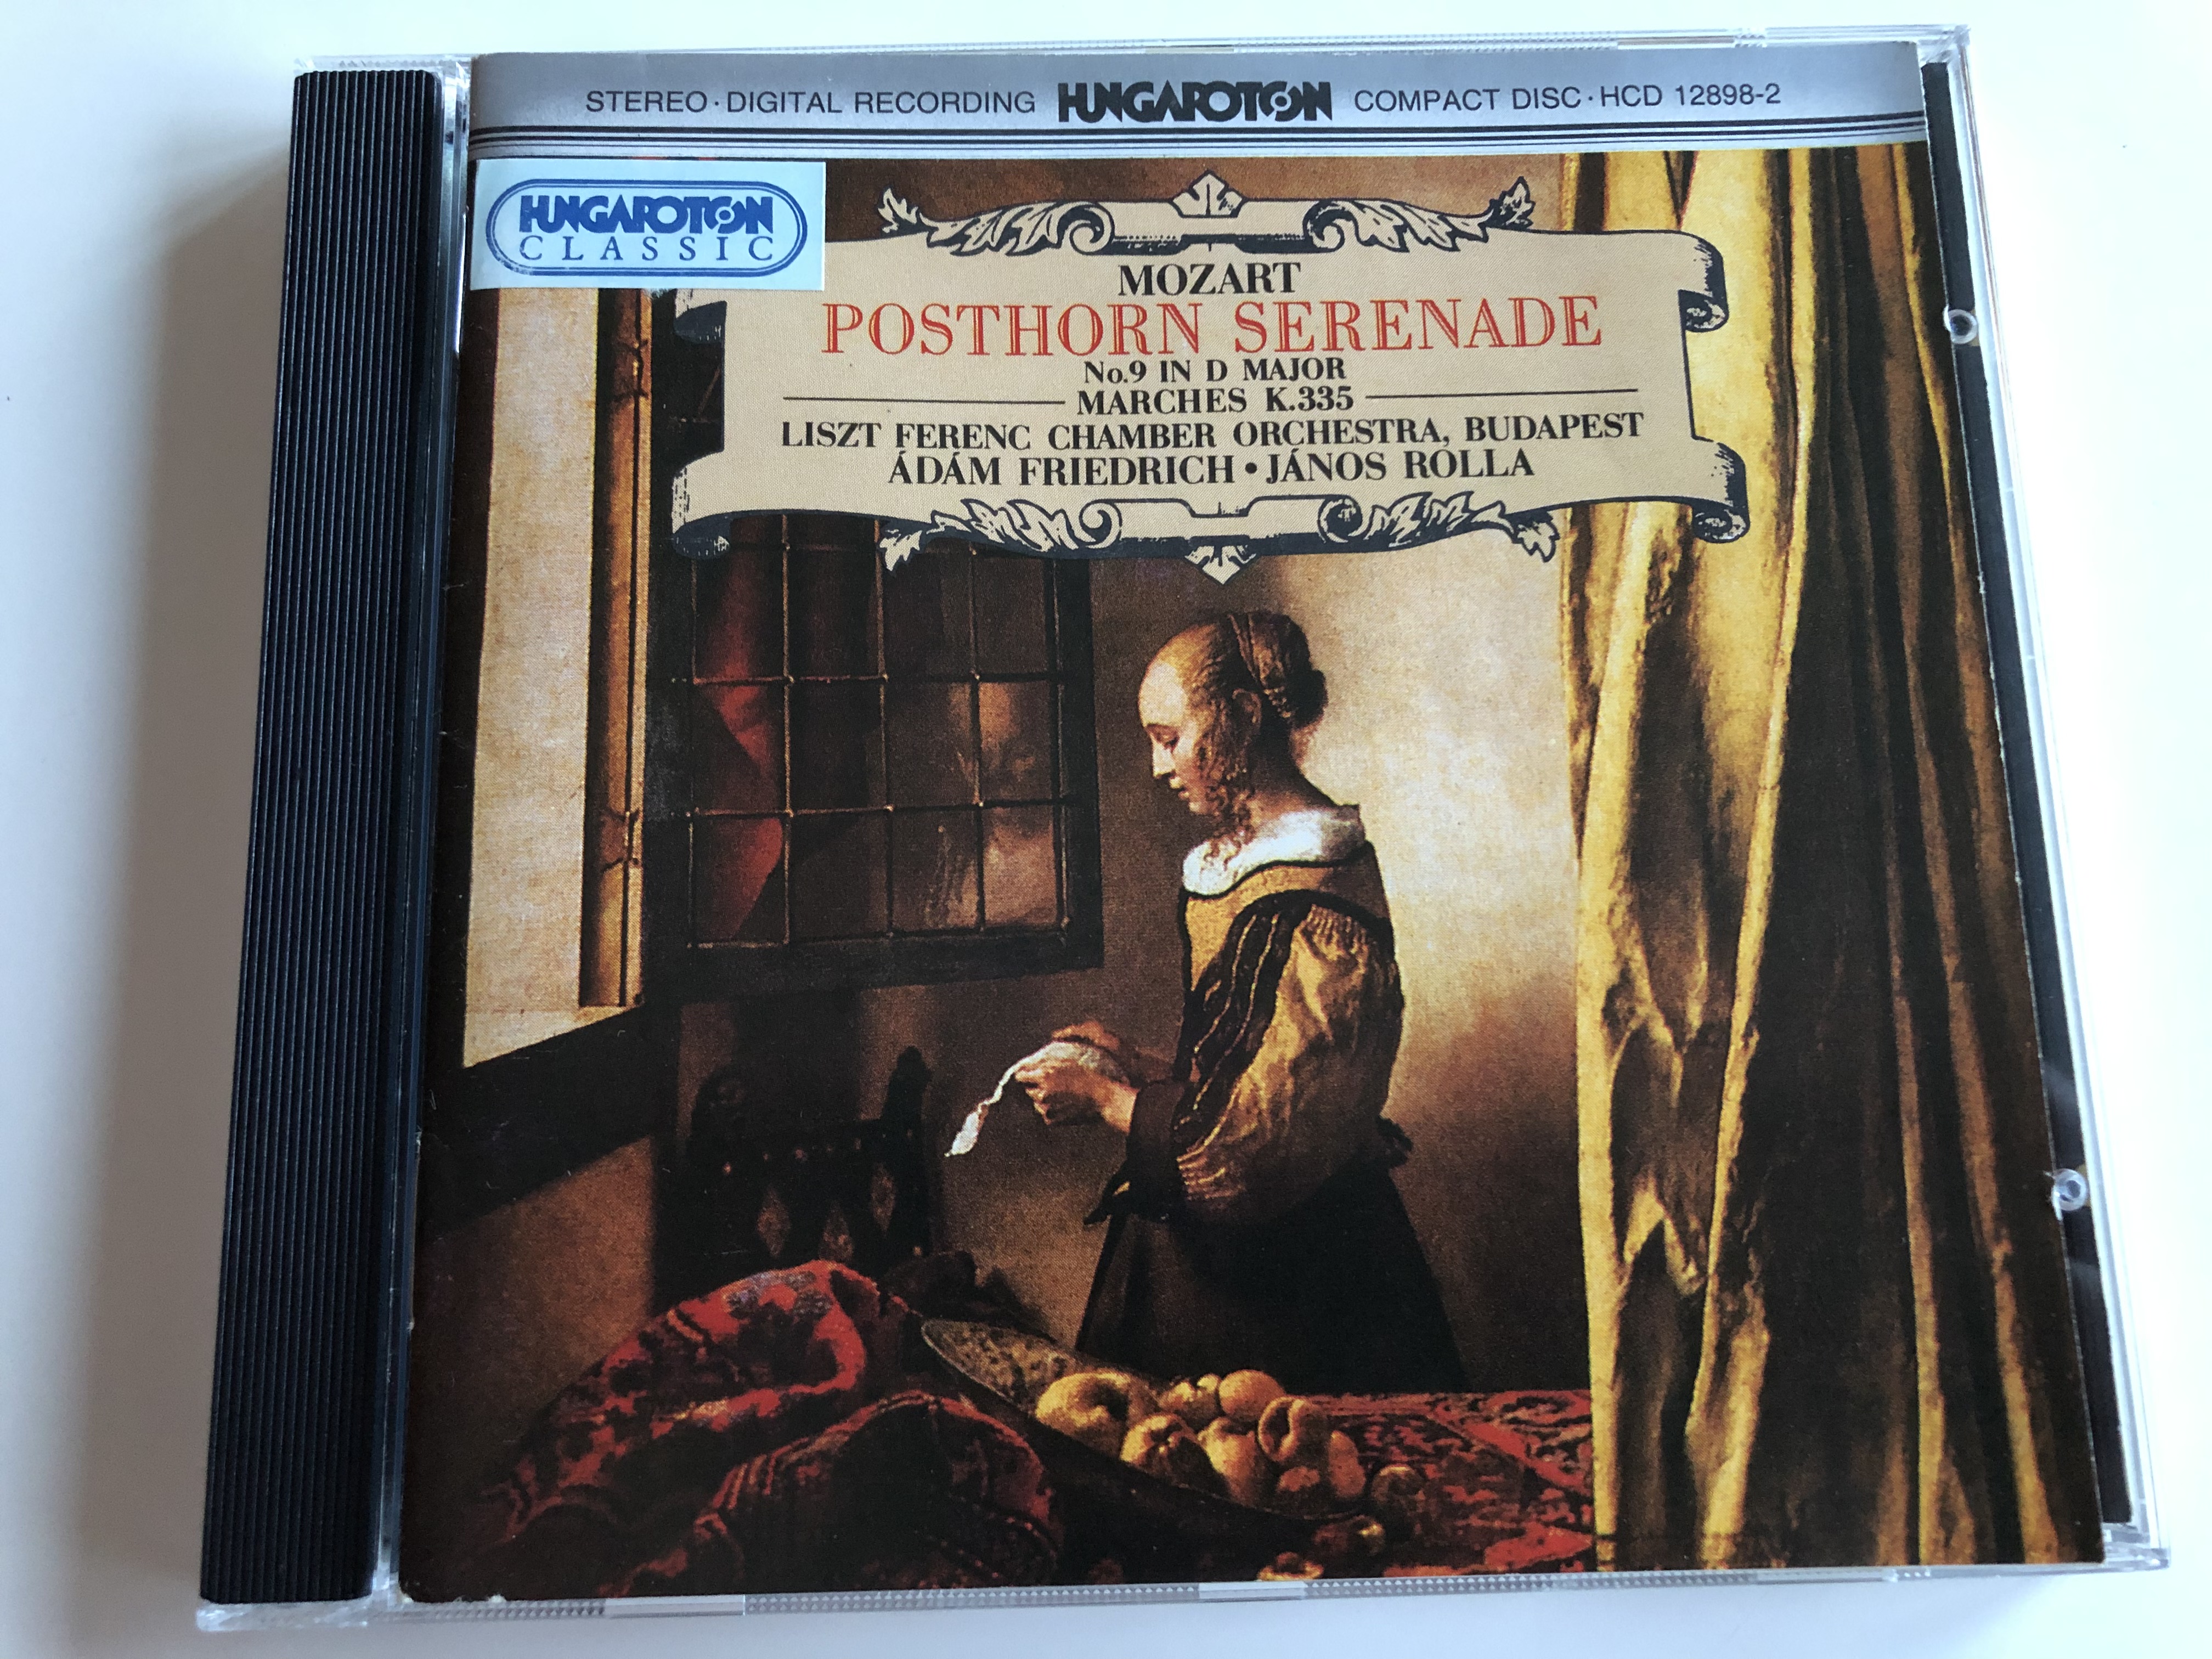 mozart-posthorn-serenade-no.9-in-d-major-marches-k.335-liszt-ferenc-chamber-orchestra-budapest-d-m-friedrich-j-nos-rolla-hungaroton-classic-audio-cd-1995-stereo-hcd-12898-2-1-.jpg